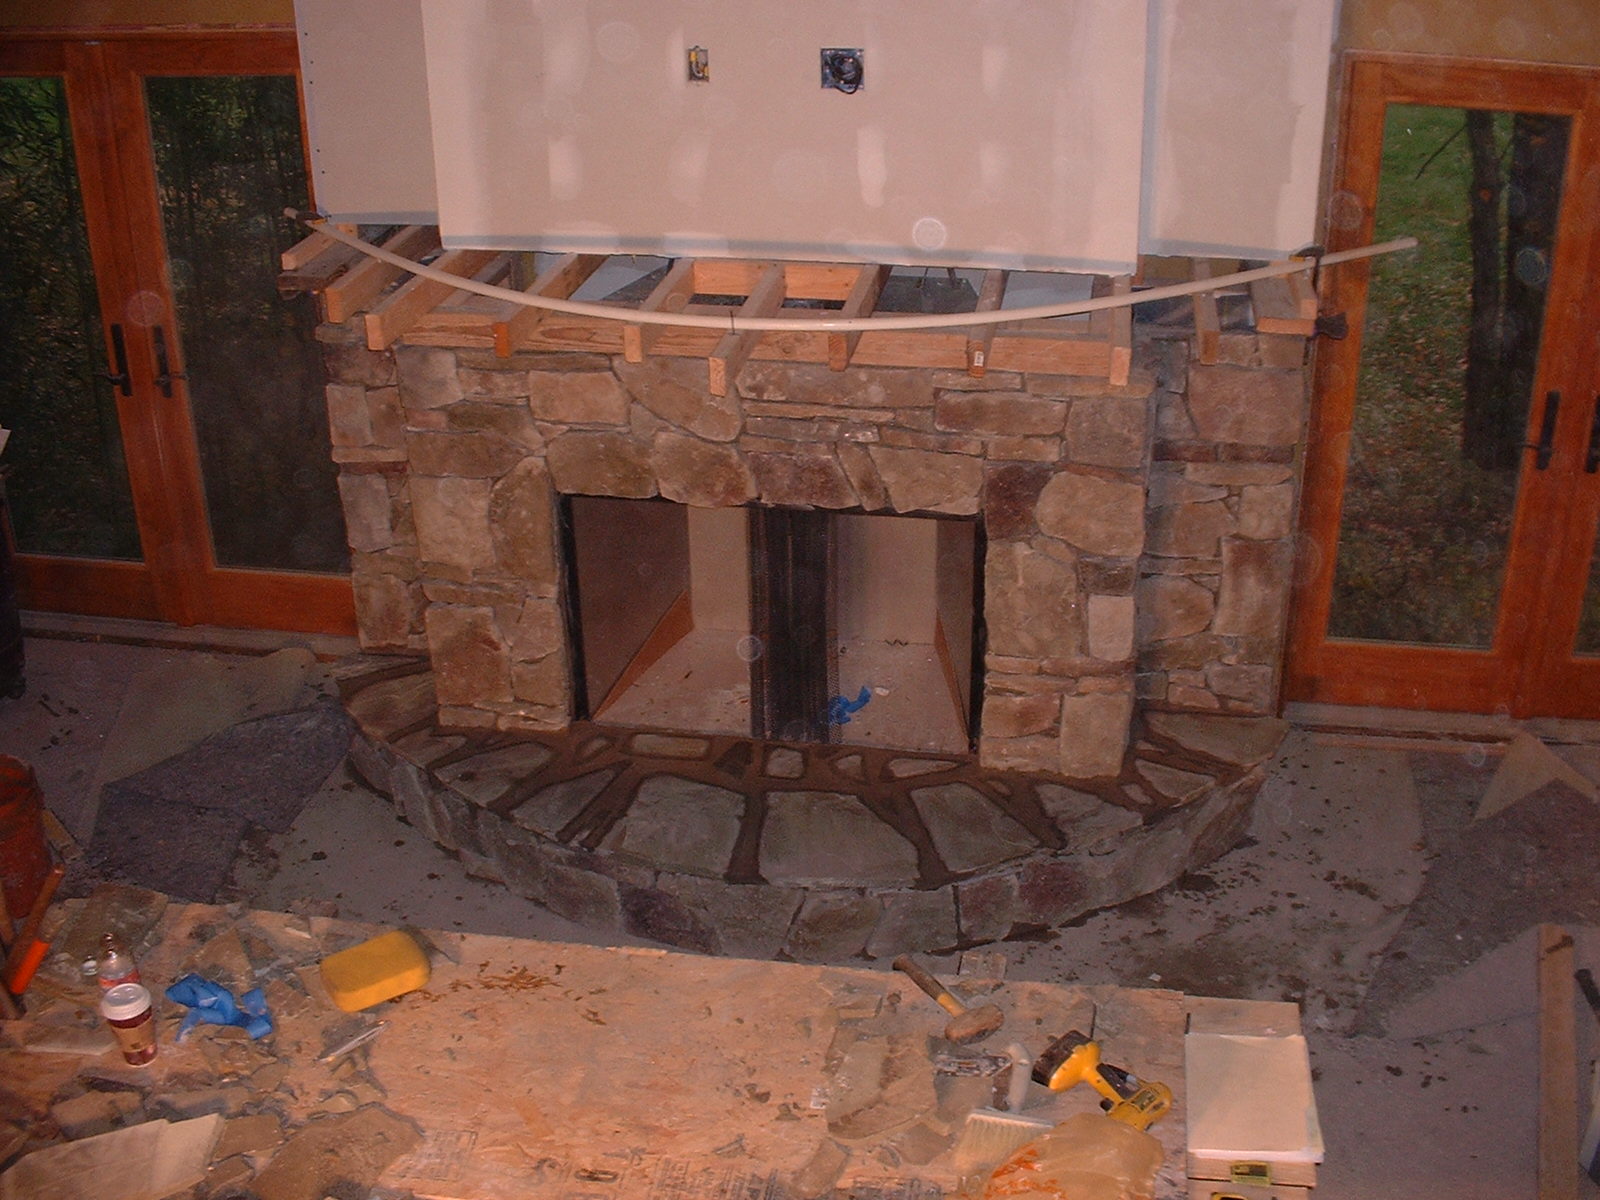 The top of the hearth is done with a natural stone.